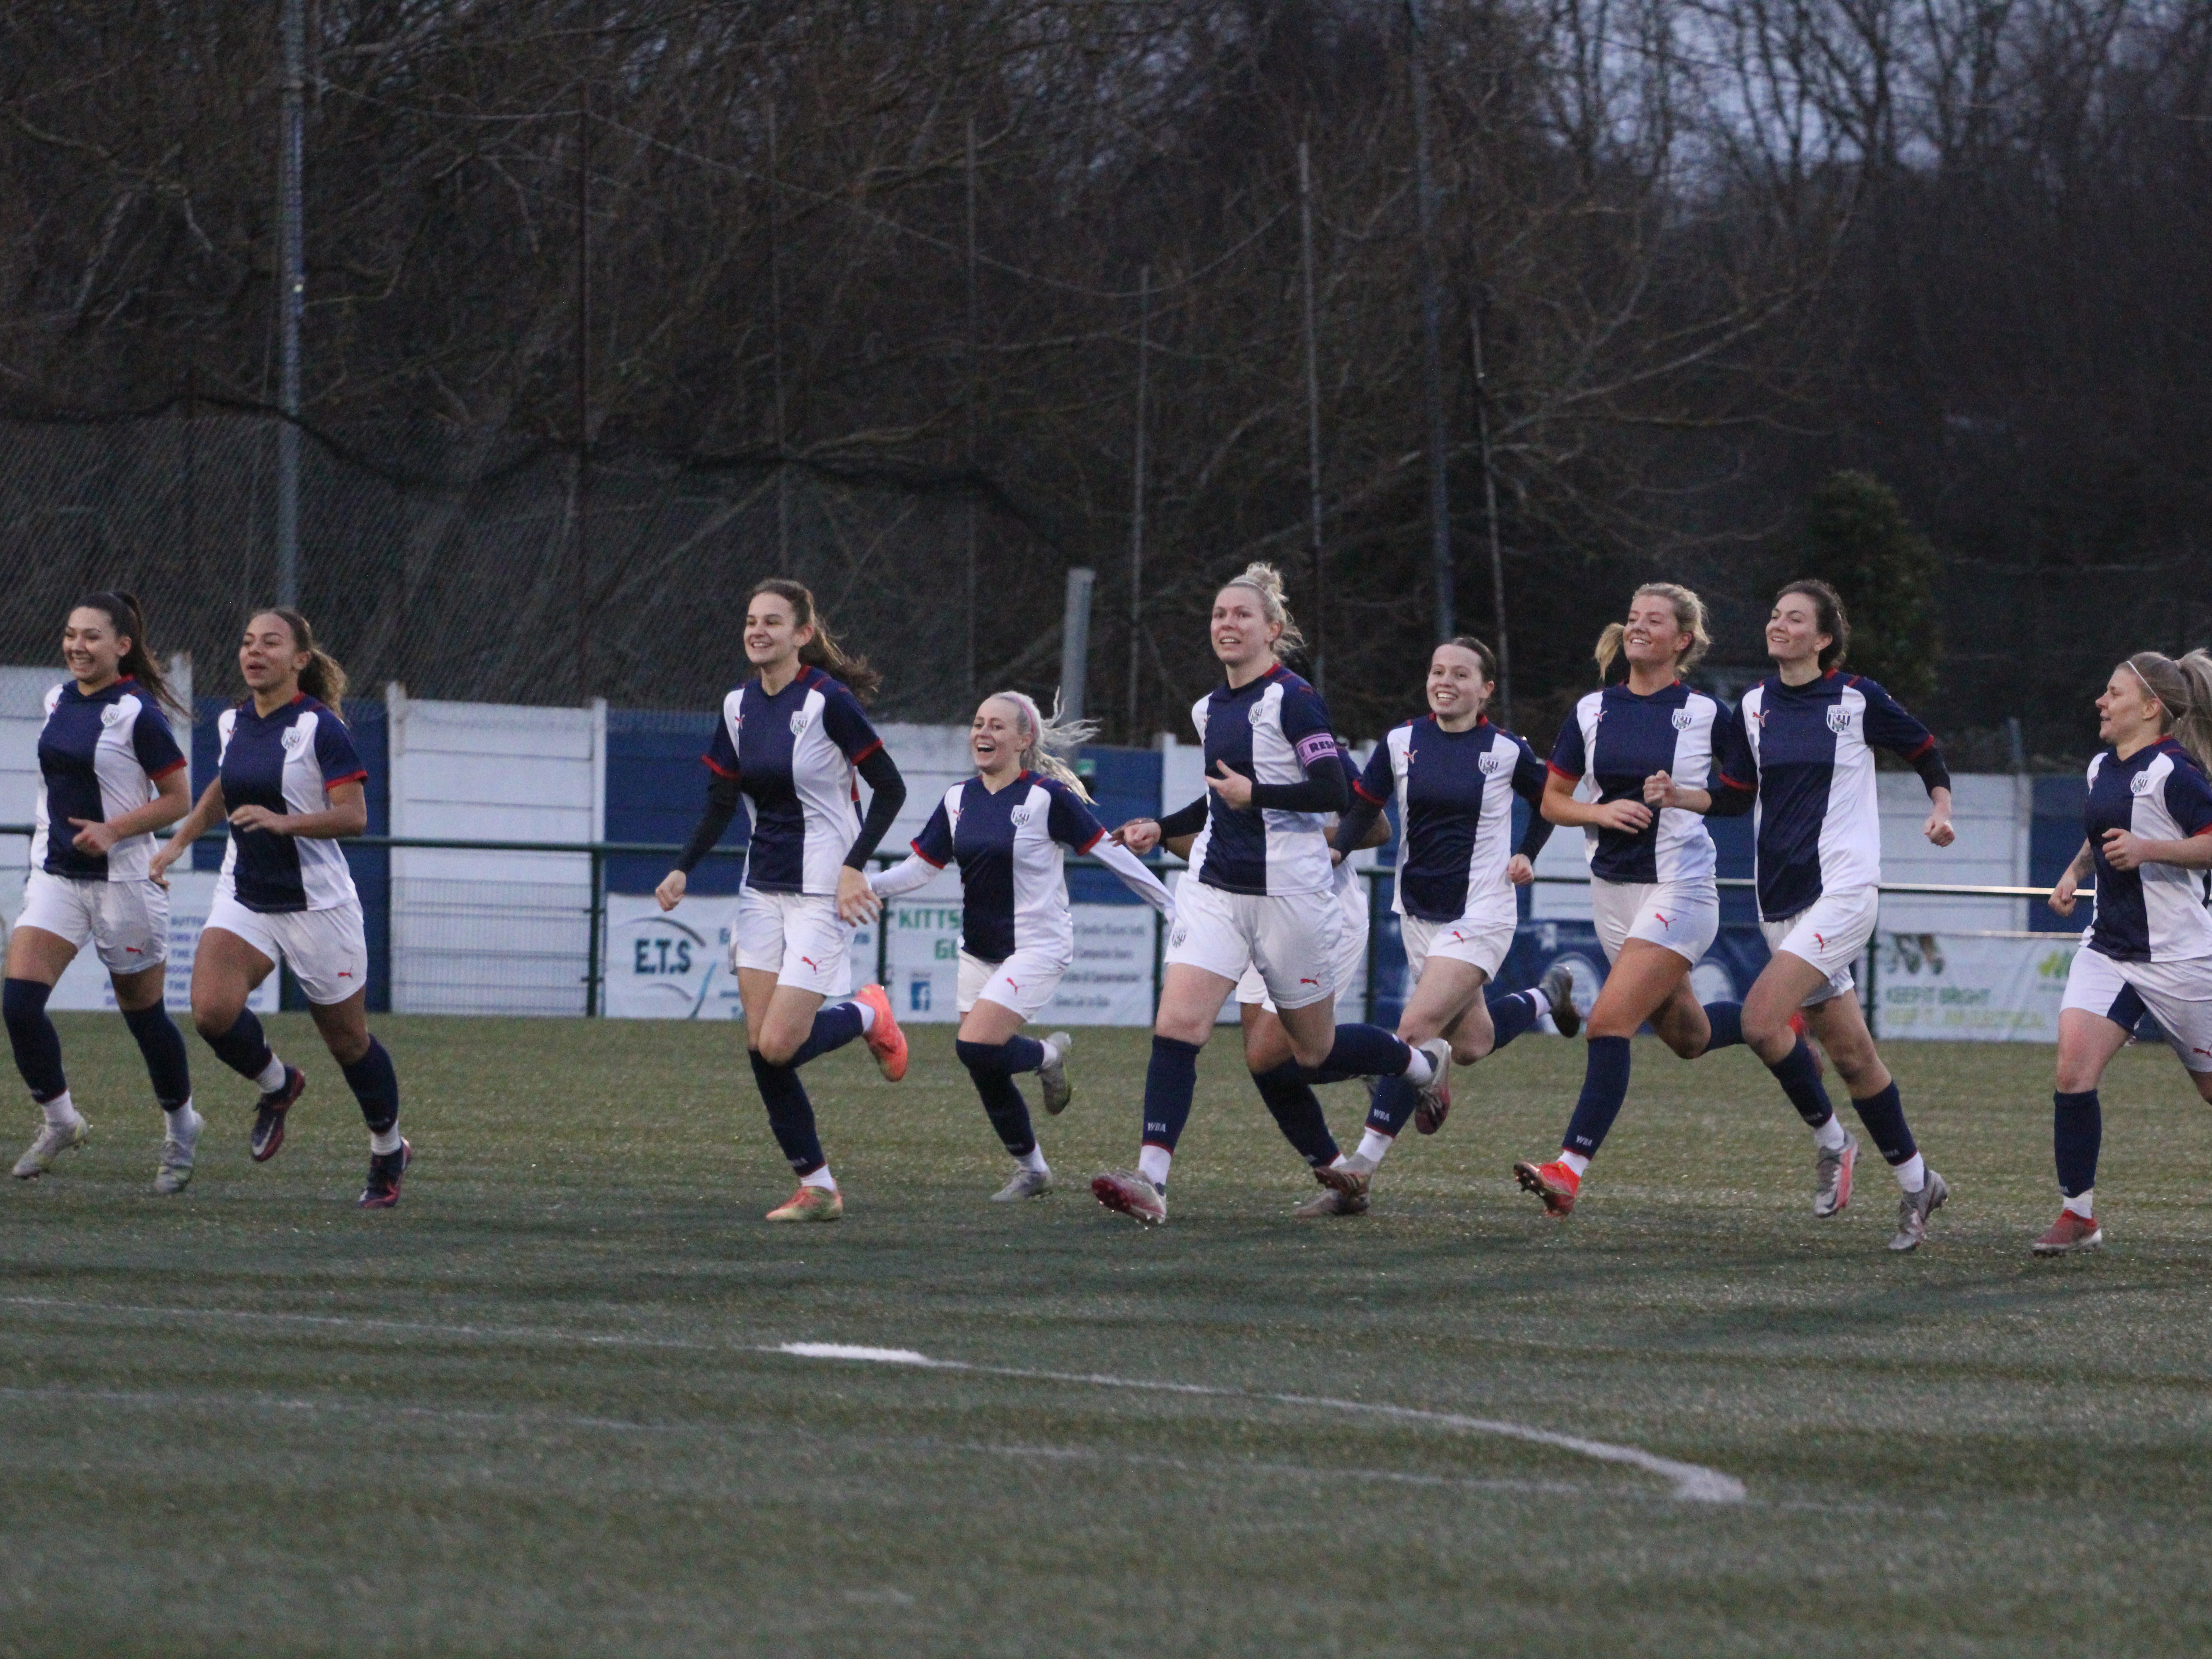 Albion Women reached the fifth round of the Vitality Women’s FA Cup for only the second time in their history following a penalty shootout win against Exeter City Women over the weekend